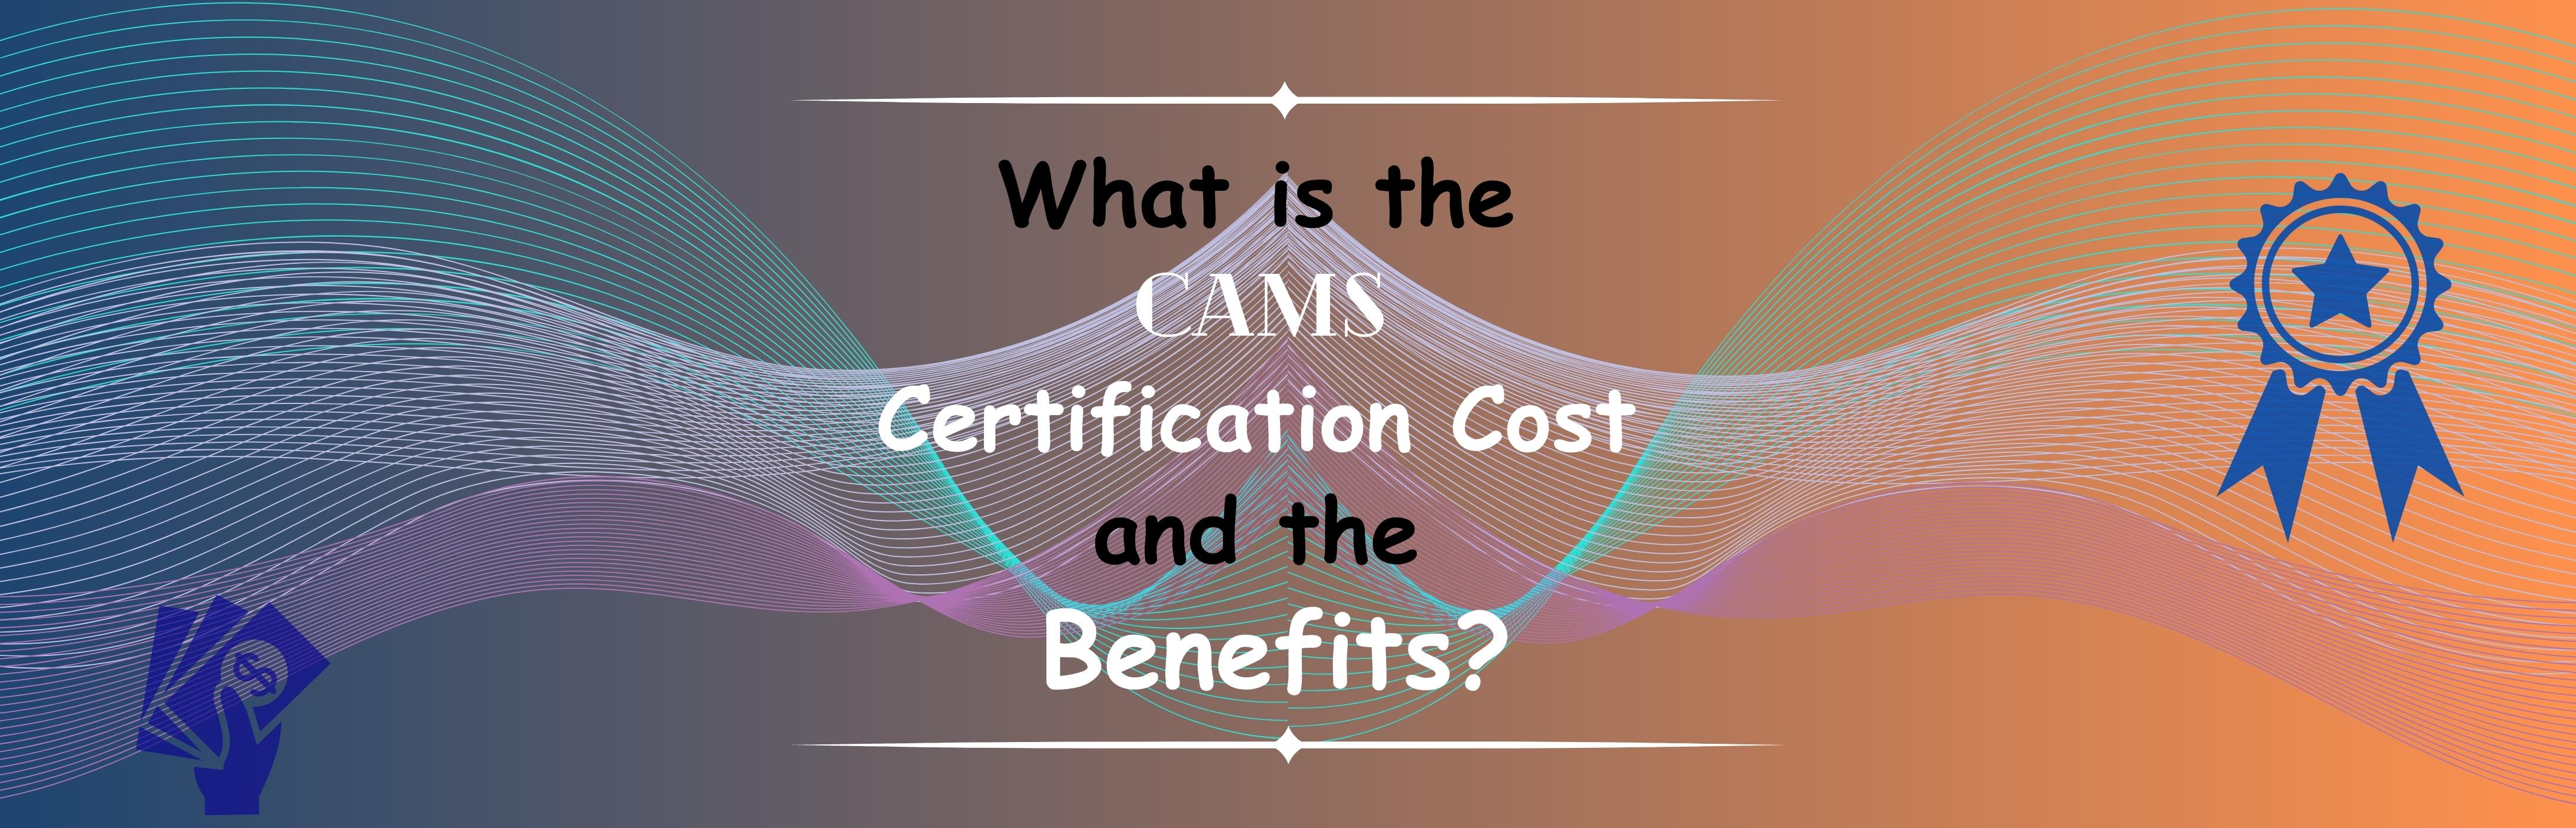 What is the CAMS Certification Cost and the Benefits